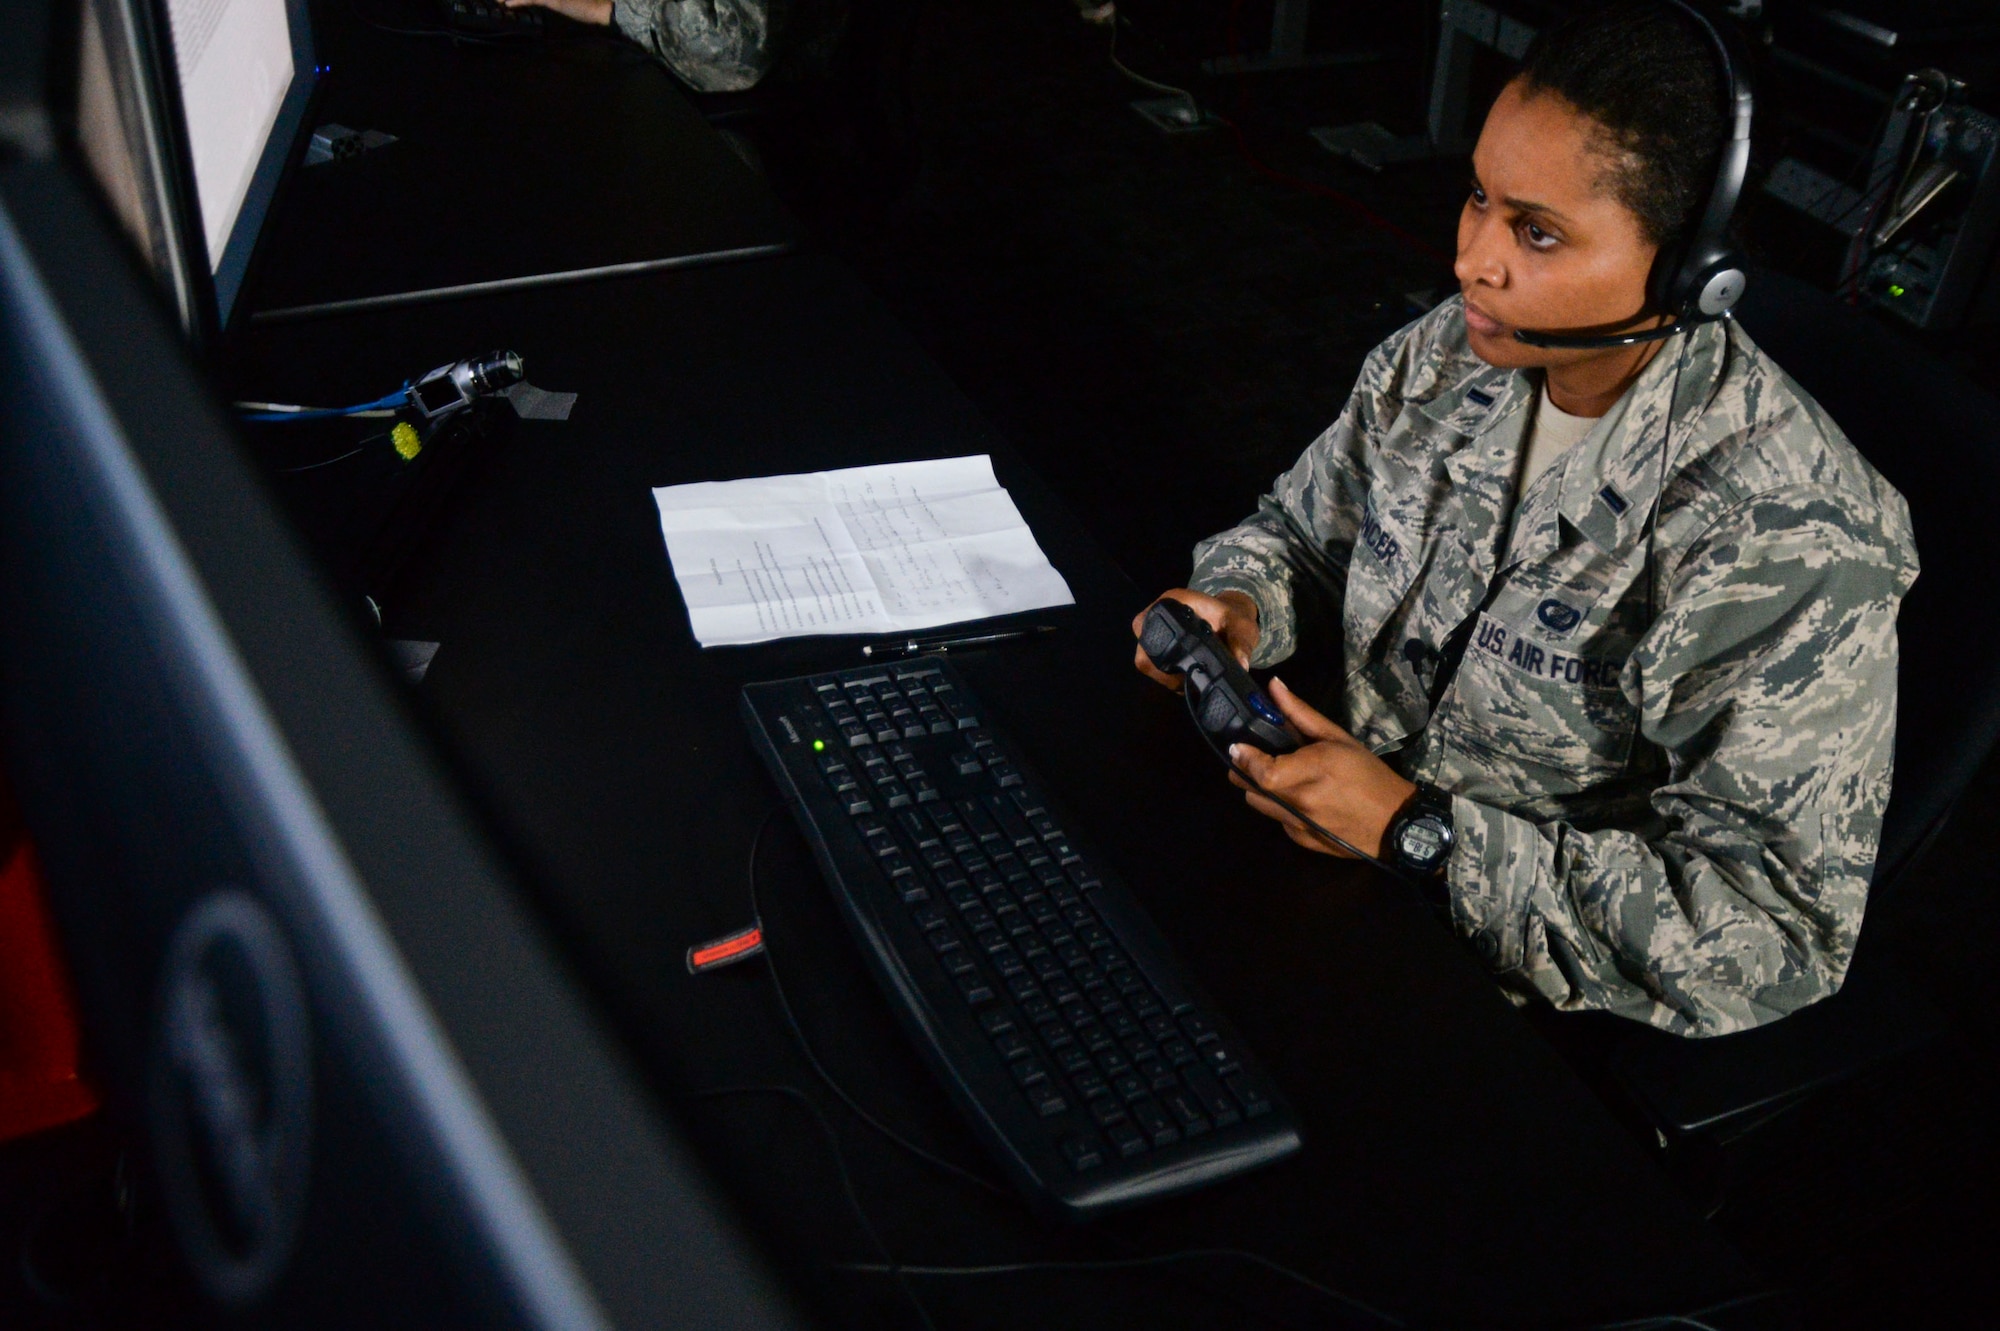 U.S. Air Force 1st Lt. Kristin Spencer, 711th Human Performance Wing behavioral scientist, watches a video for suspicious behavior during a demonstration of a new Enhanced Reporting, Narrative Event Streaming Tool developed by the Air Force Research Lab, Oct. 15, 2014, at Wright-Patterson Air Force Base, Ohio.  The program aims to make intelligence analyst’s jobs easier by streamlining some of their routine tasks which could enable to them save more lives. (U.S. Air Force photo by Wesley Farnsworth)